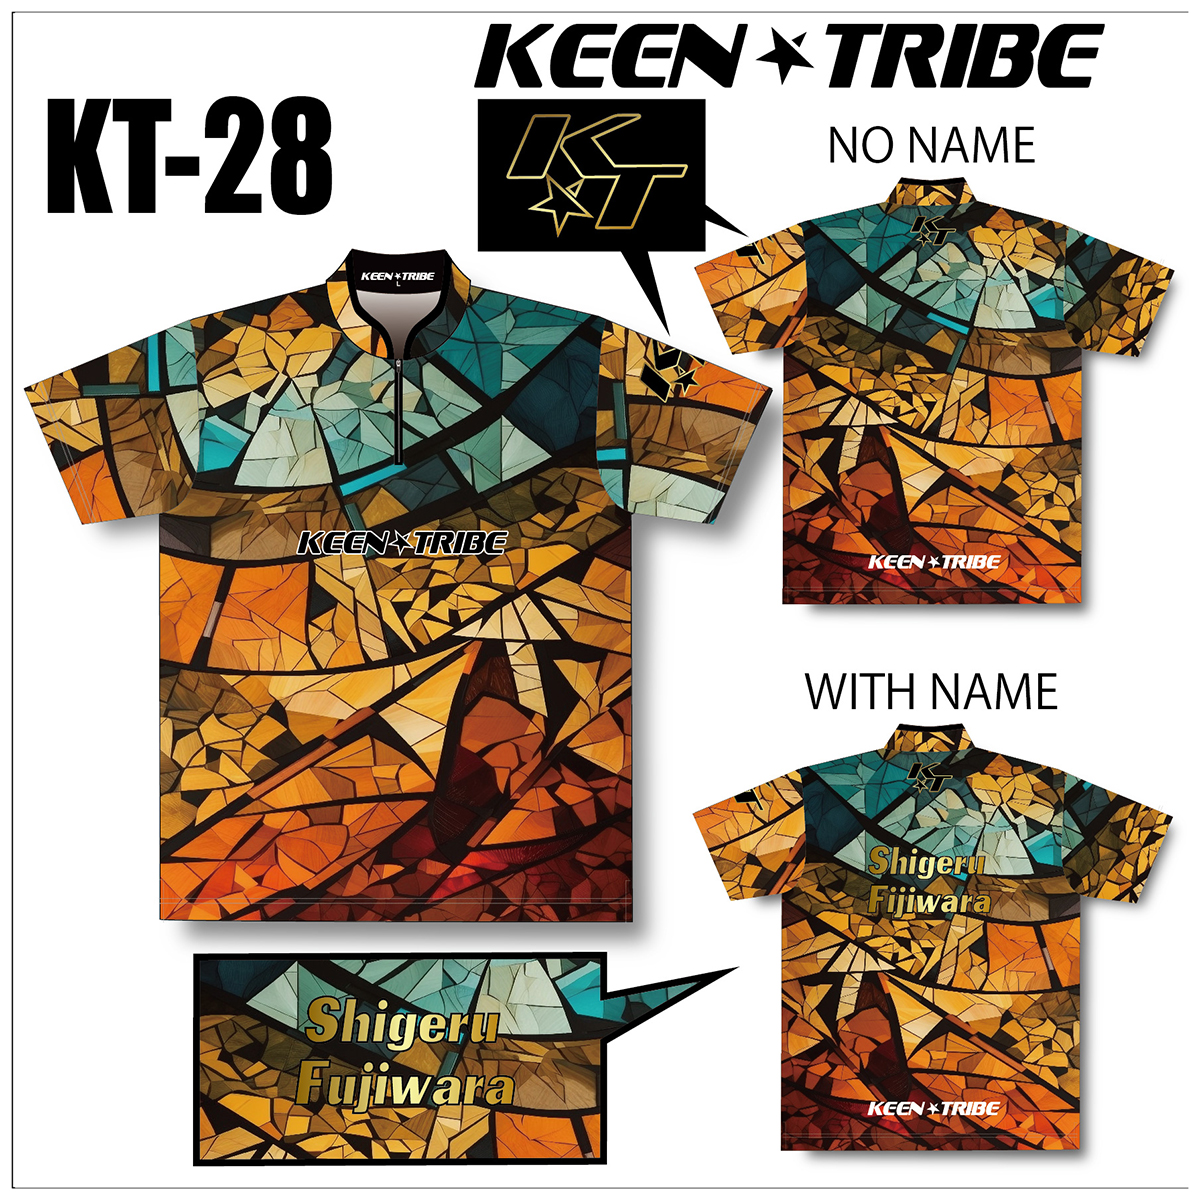 KEEN ★ TRIBE　KT-28(受注生産)